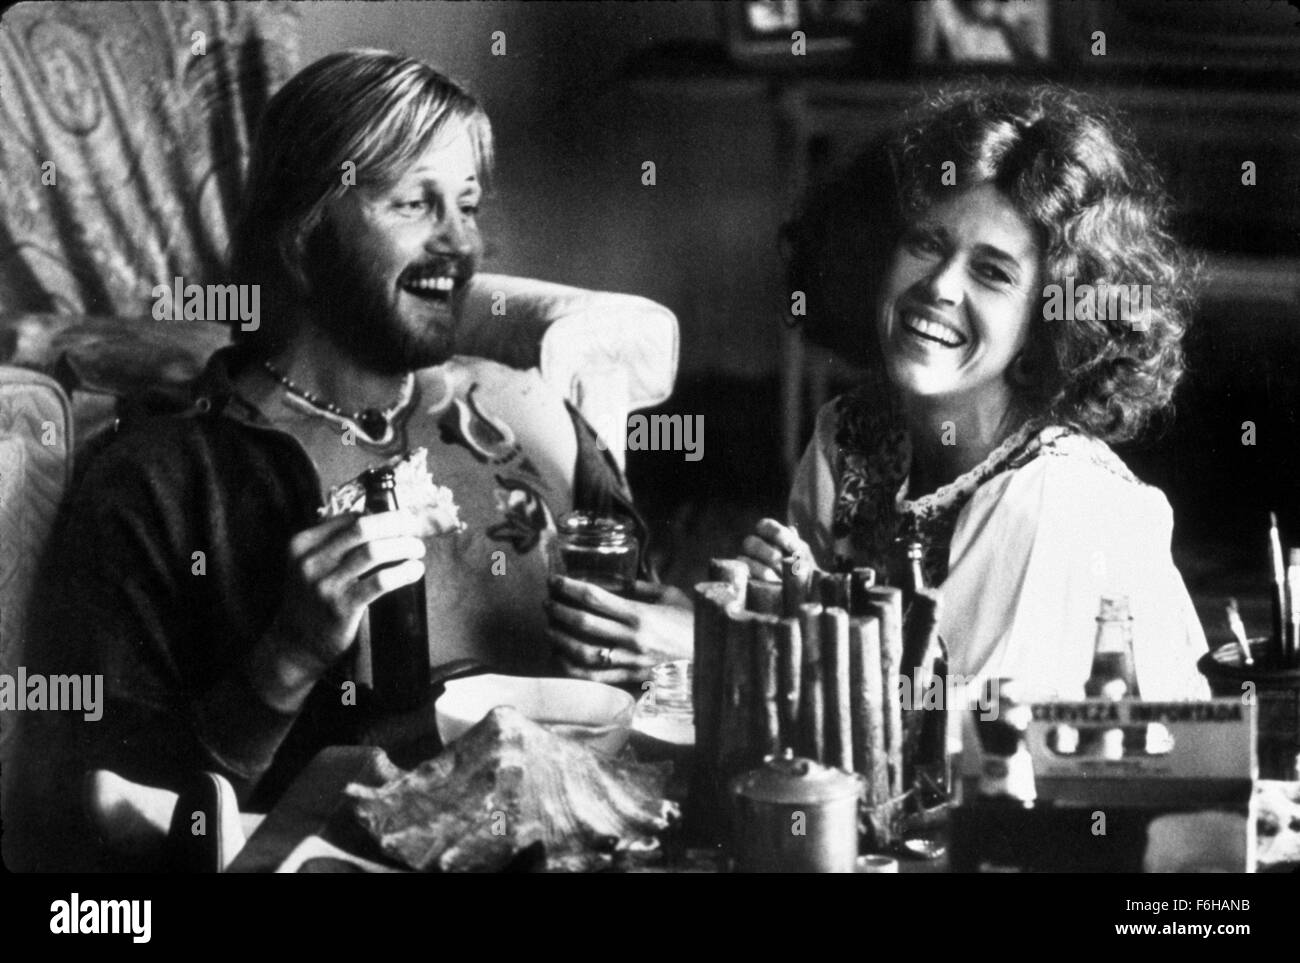 1978, Film Title: COMING HOME, Director: HAL ASHBY, Studio: UA, Pictured: 1978, AWARDS - ACADEMY, BEST ACTOR, BEST ACTRESS, JANE FONDA, JON VOIGHT, DRINKING, DRUNK, LAUGHING, ALCOHOL, STONED, EATING, HIPPY, BEARD, OSCAR RETRO. (Credit Image: SNAP) (Credit Image: c SNAP/Entertainment Pictures) Stock Photo